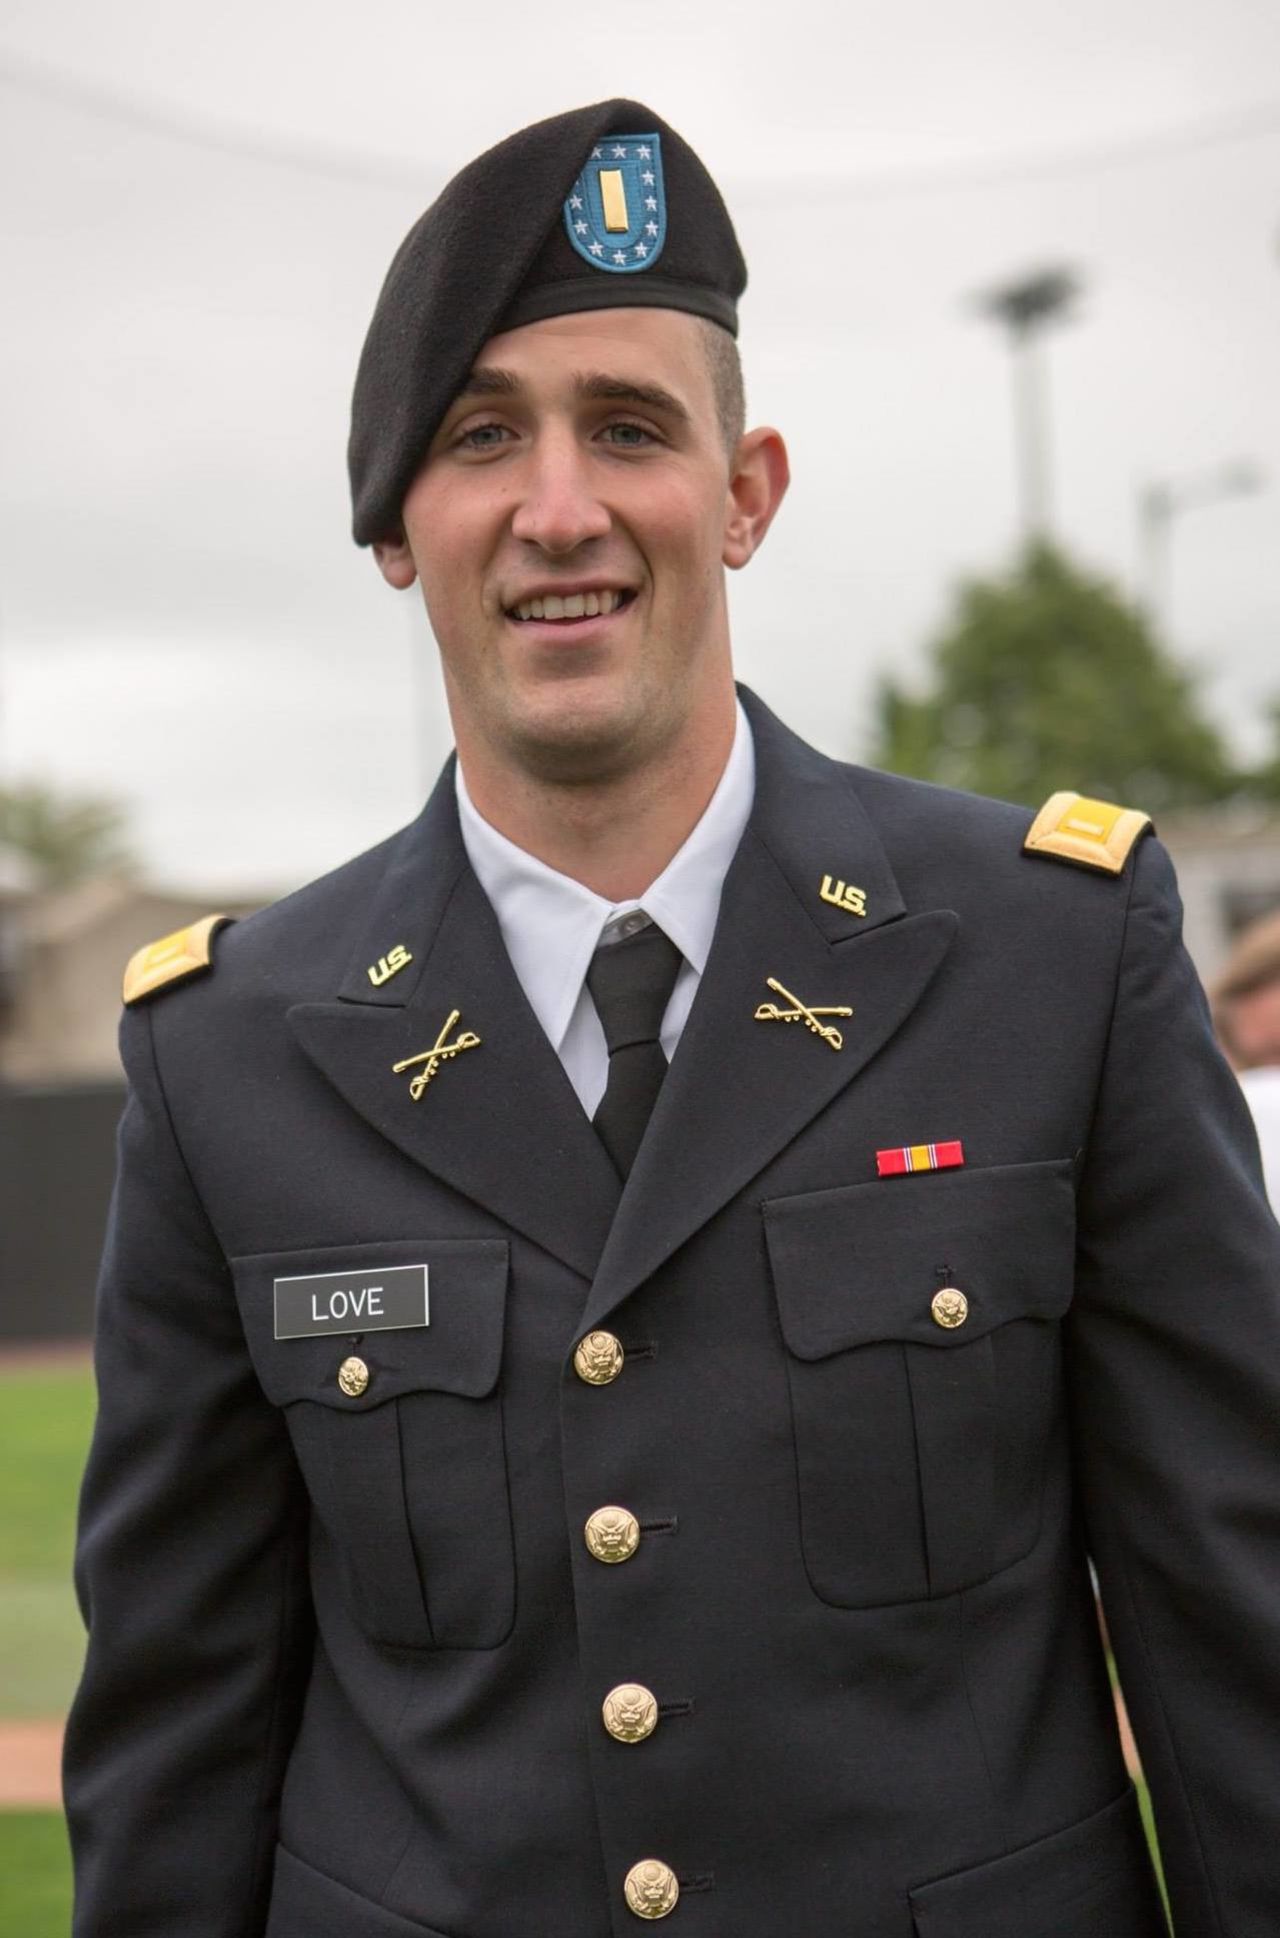 First Lt. Connor Love is an active-duty Army officer who serves on the ground support team as CFO for USX. During his time at West Point, Love worked with veteran nonprofit organizations. 